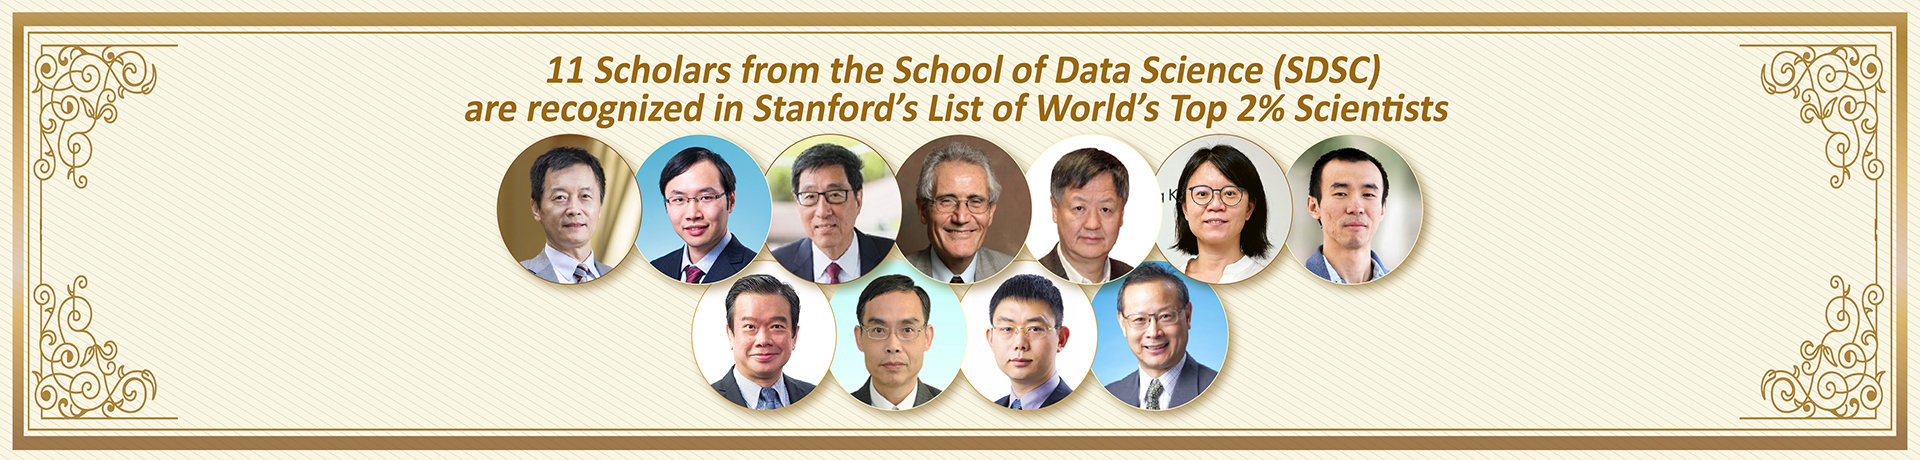 Eleven Scholars from the School of Data Science (SDSC) are recognized in Stanford’s List of World’s Top 2% Scientists